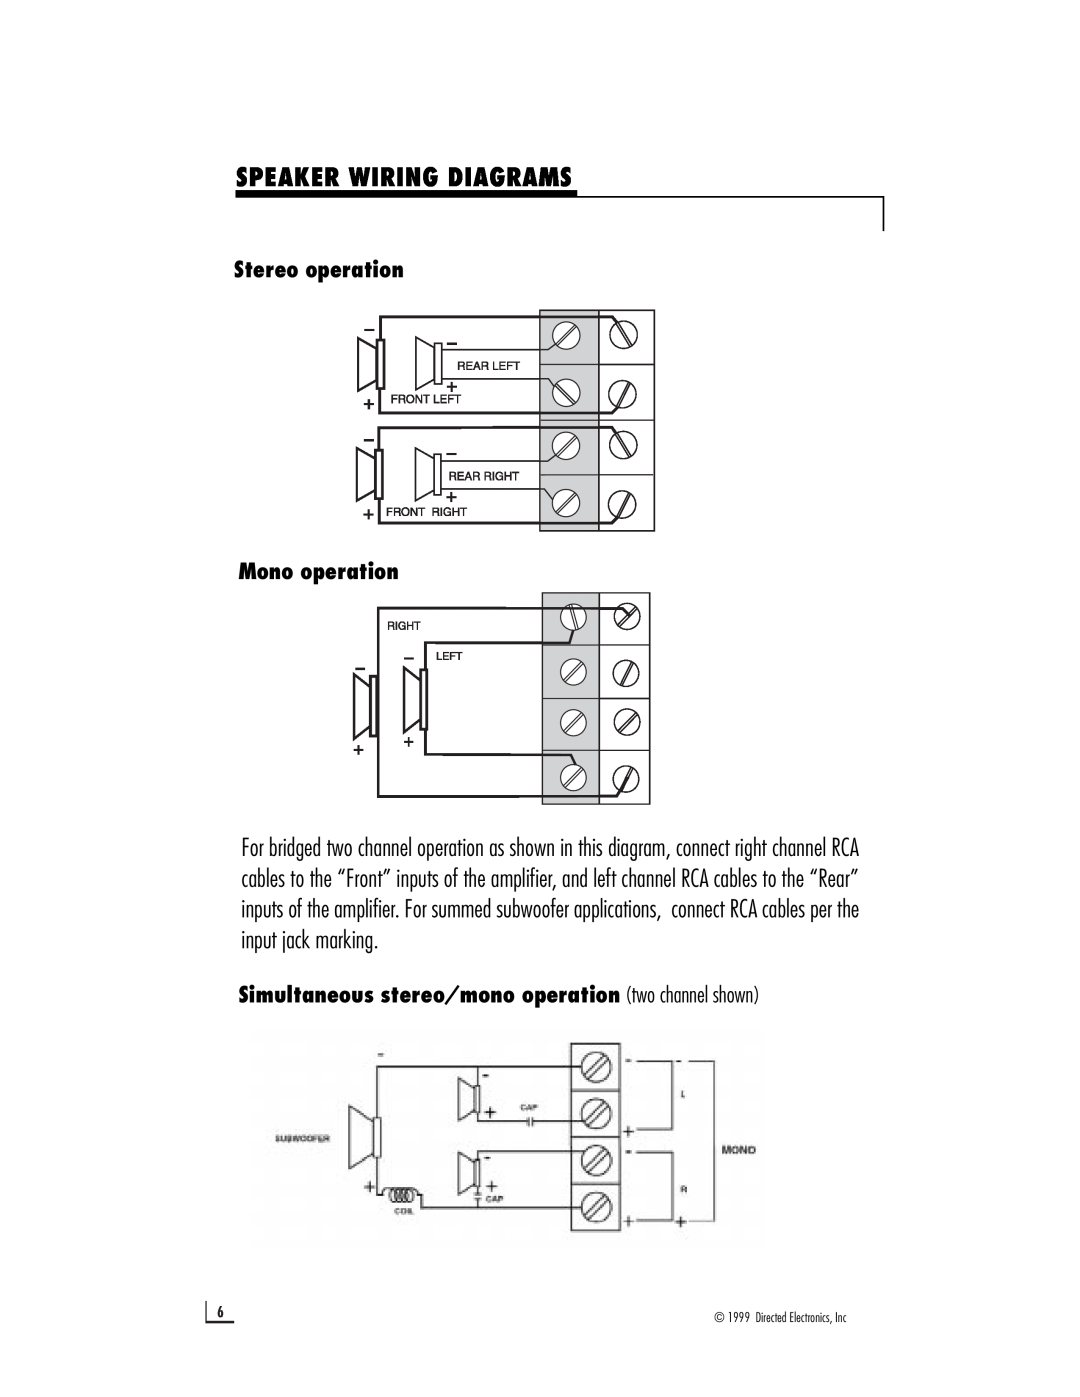 Directed Electronics 500 owner manual Speaker Wiring Diagrams, Stereo operation Mono operation 